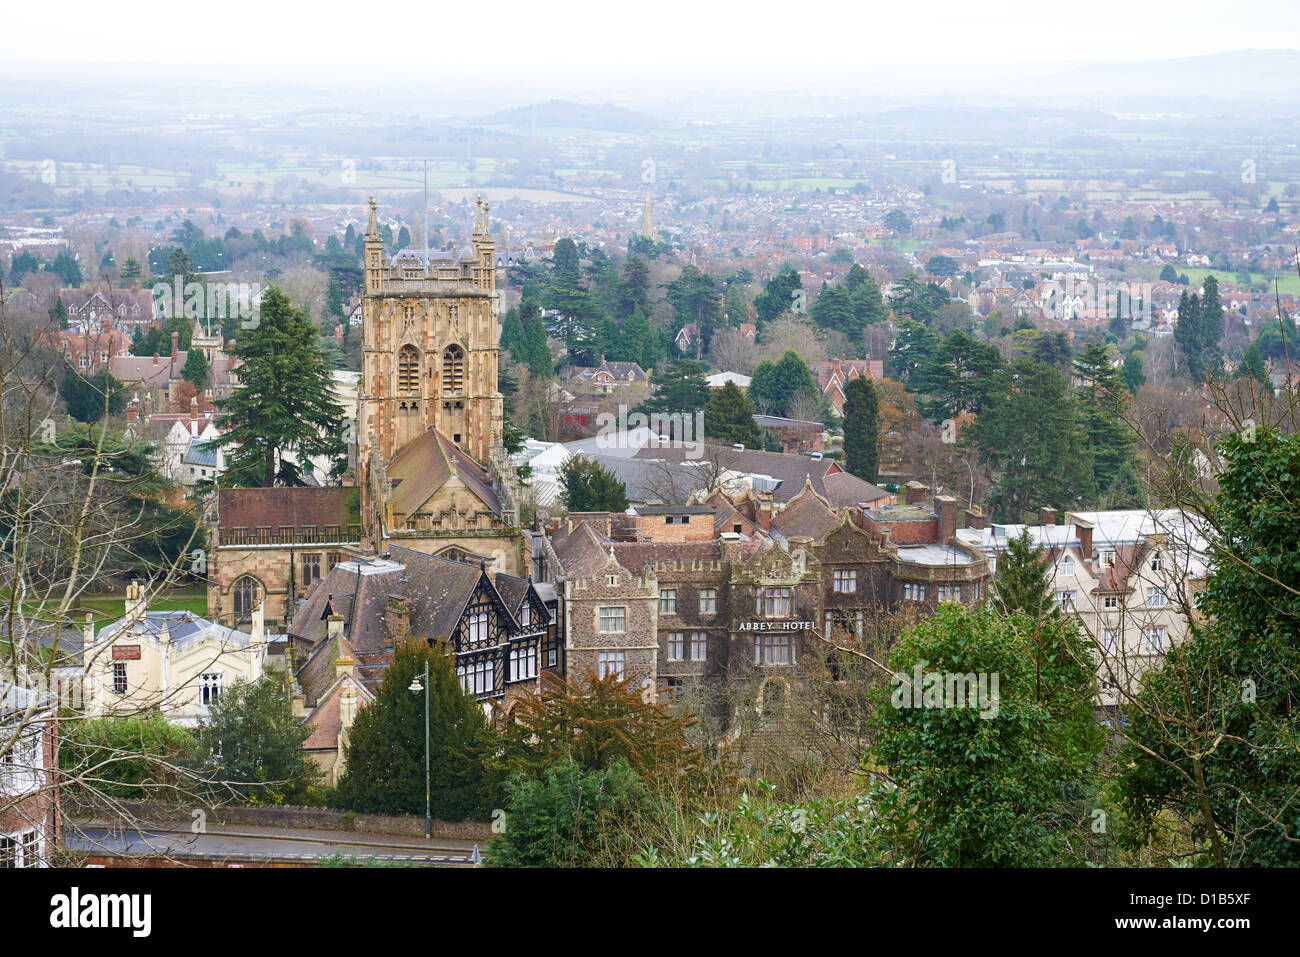 View over the town of Great Malvern with the priory on the left Great Malvern Worcestershire UK Stock Photo